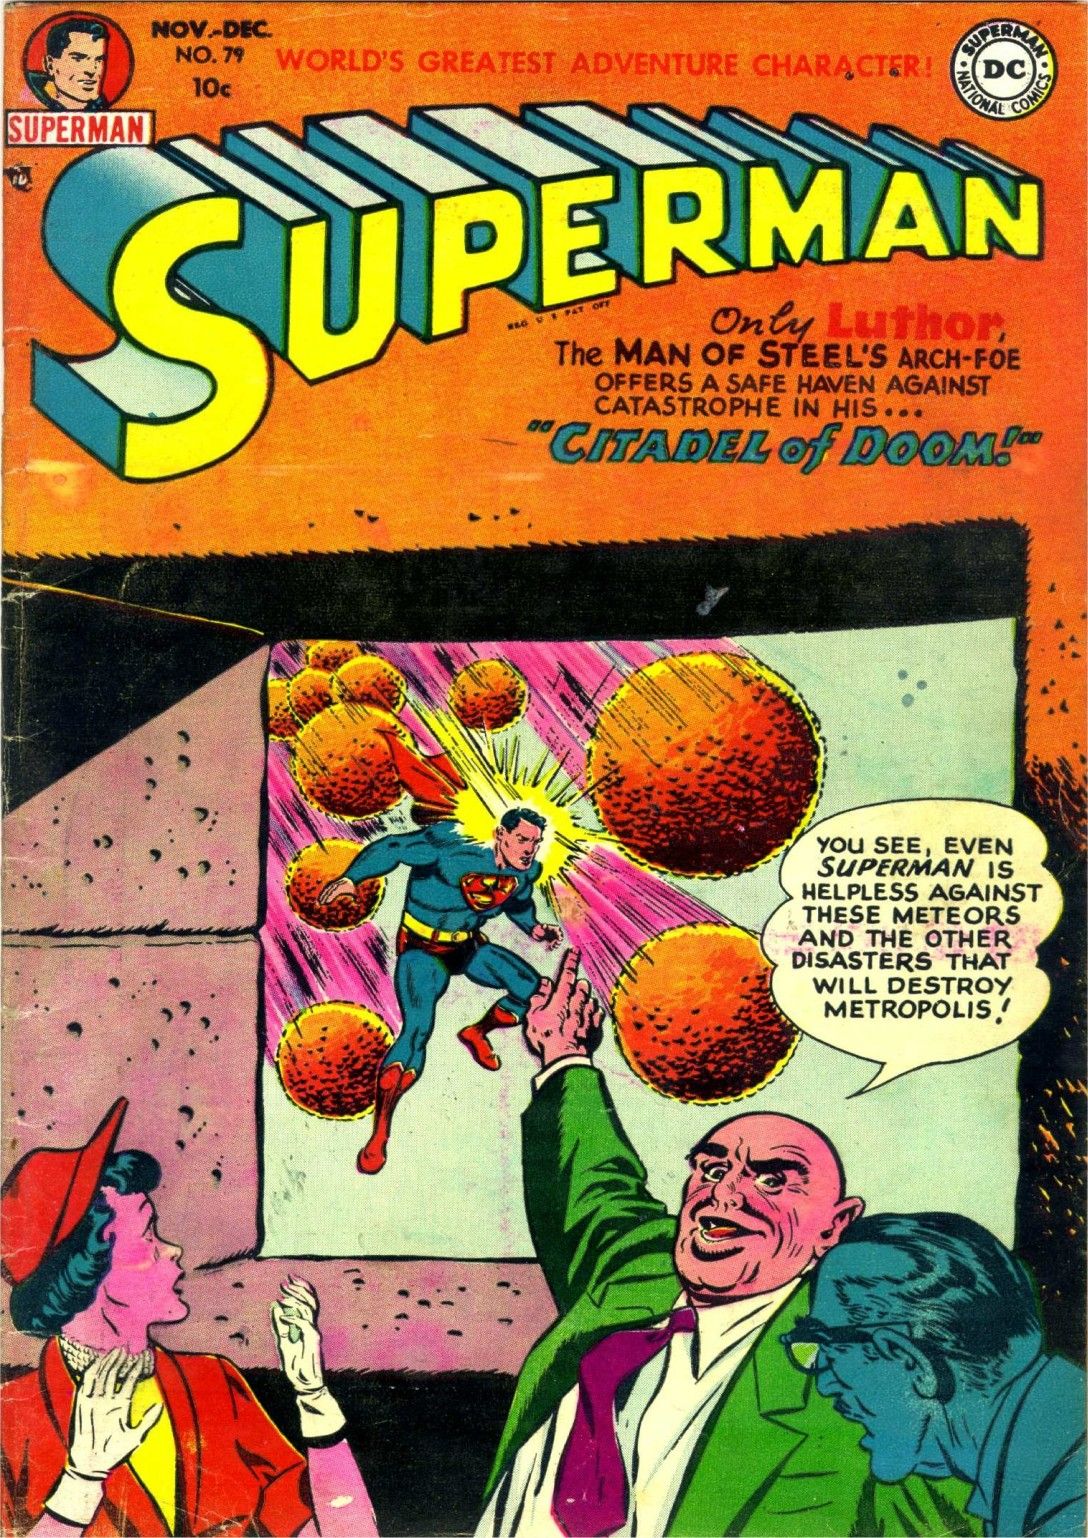 Superman fights against Luthor